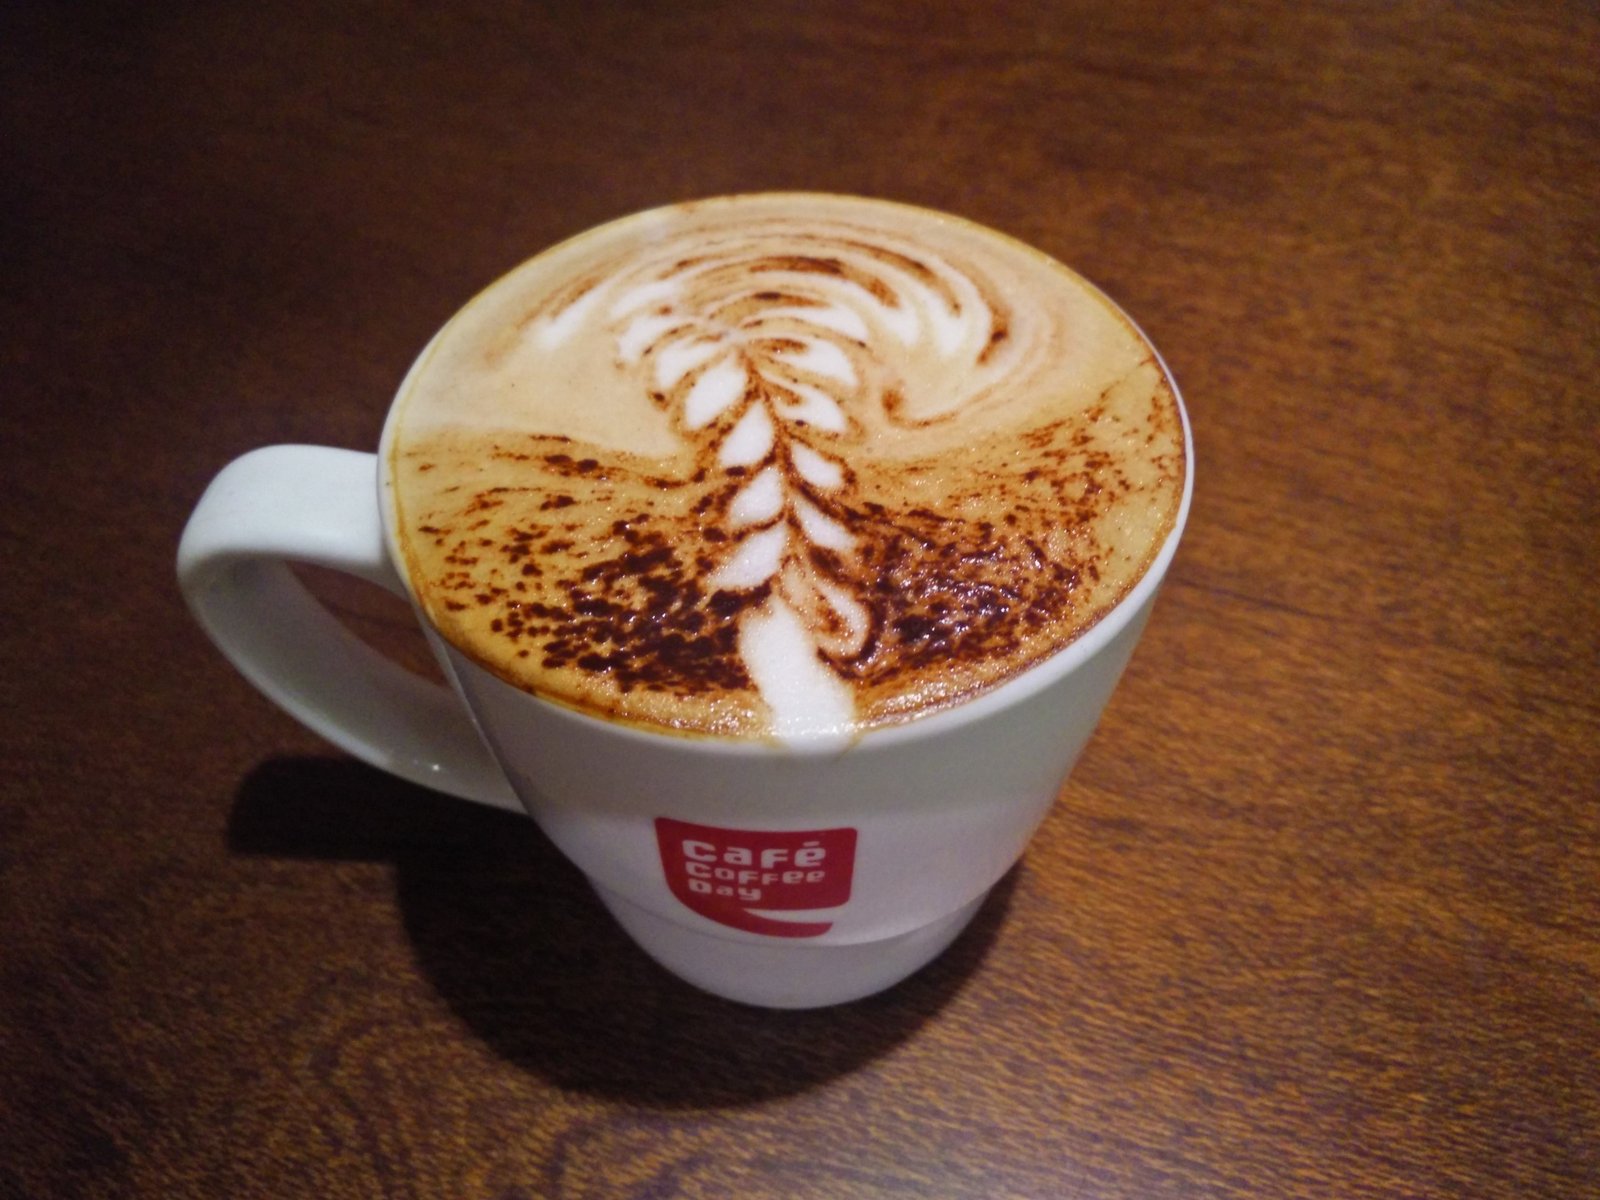 Cafe Coffee Day-Latte Art